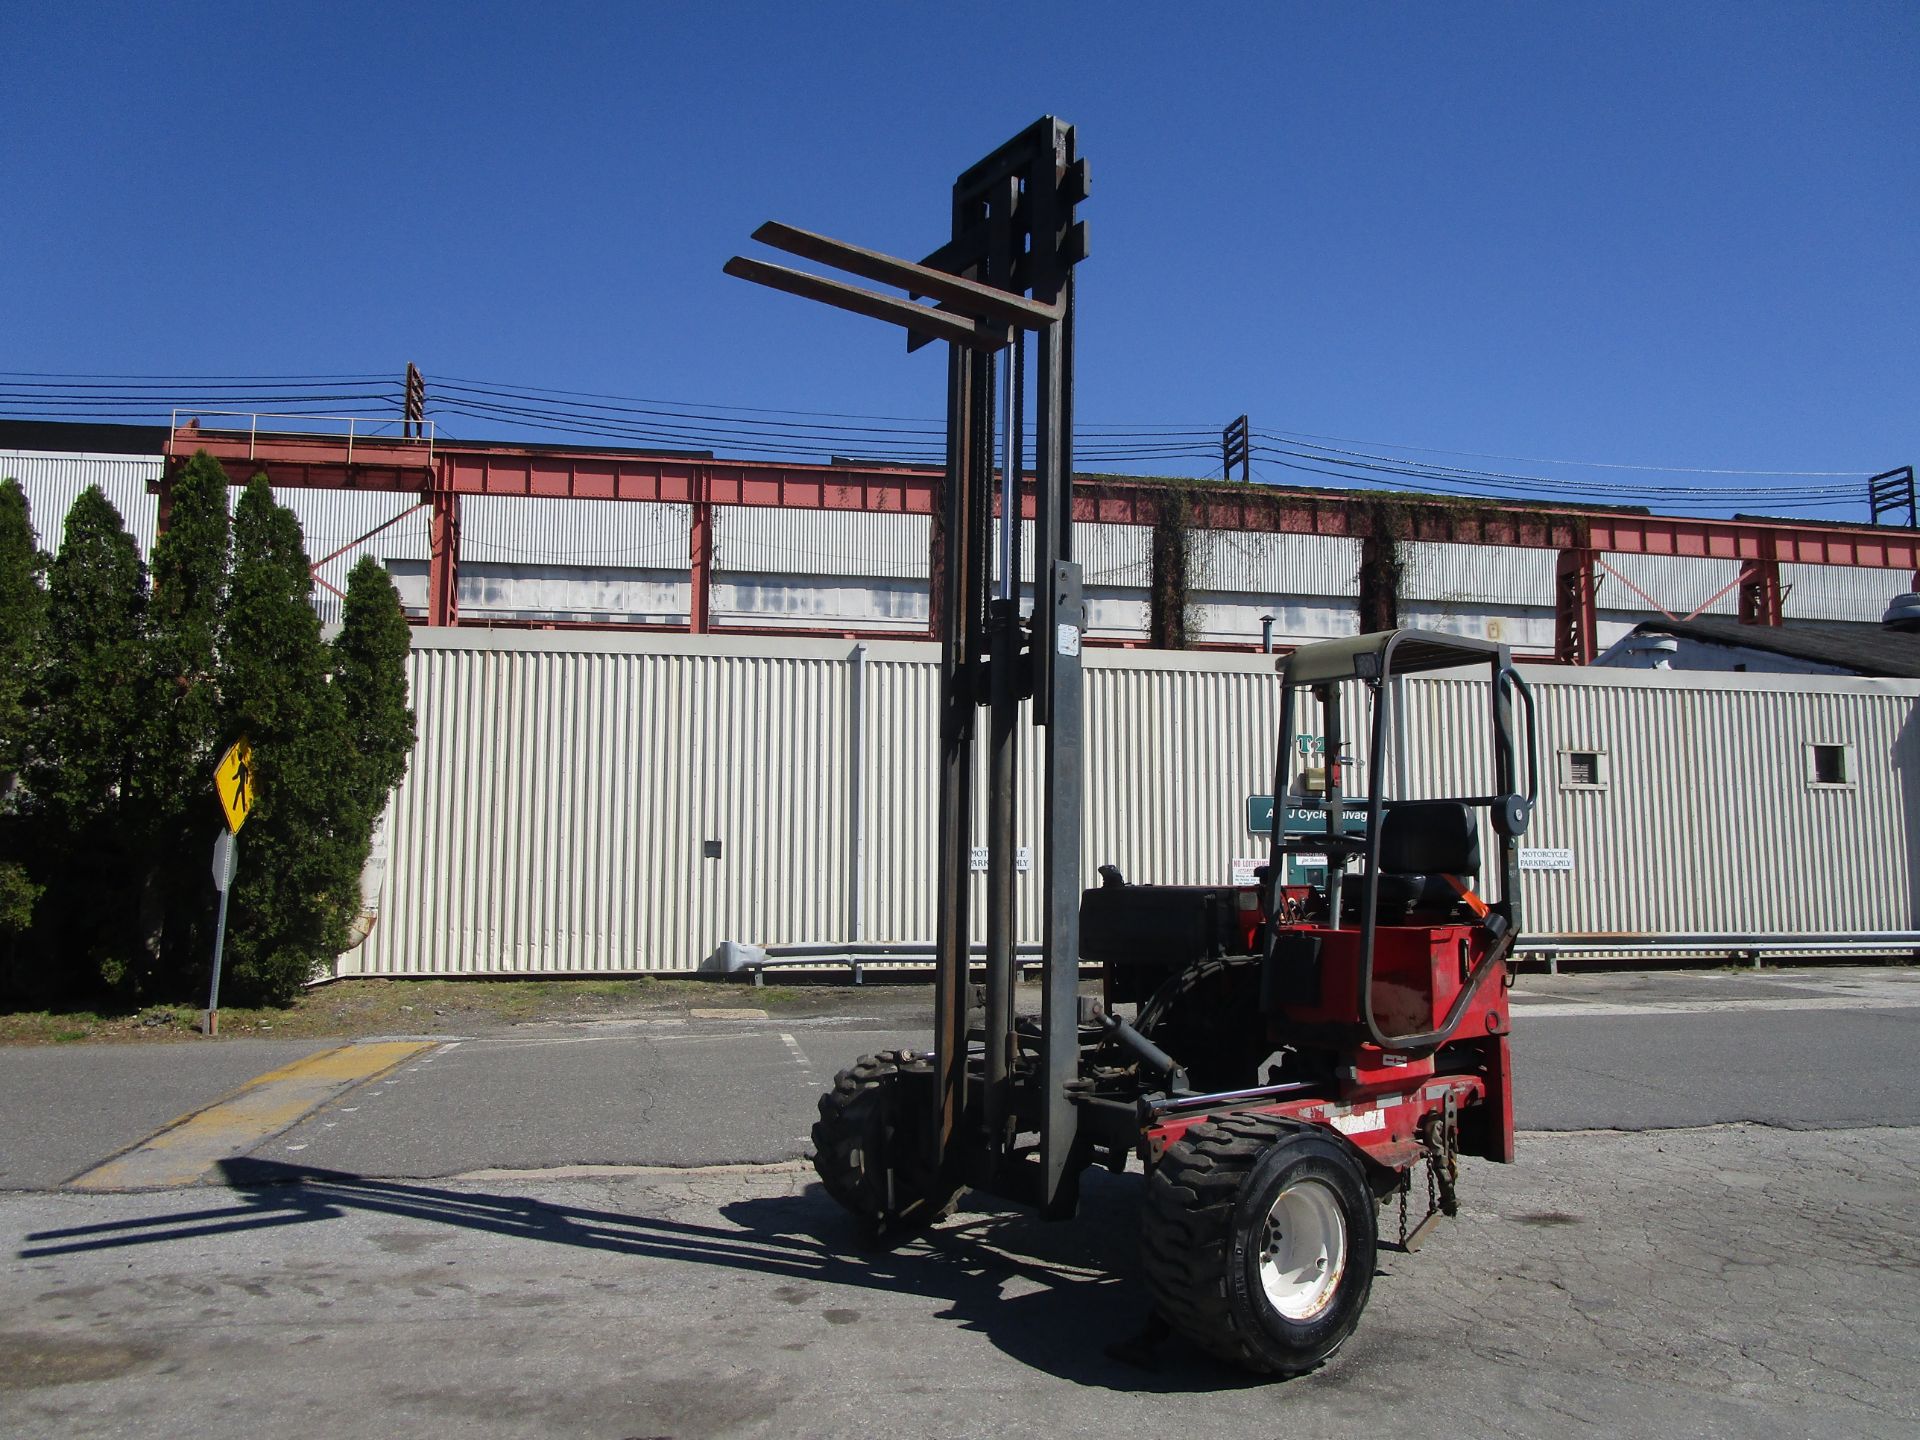 Moffett M5000 5,000lb Forklift - Located in Lester, PA - Image 6 of 8